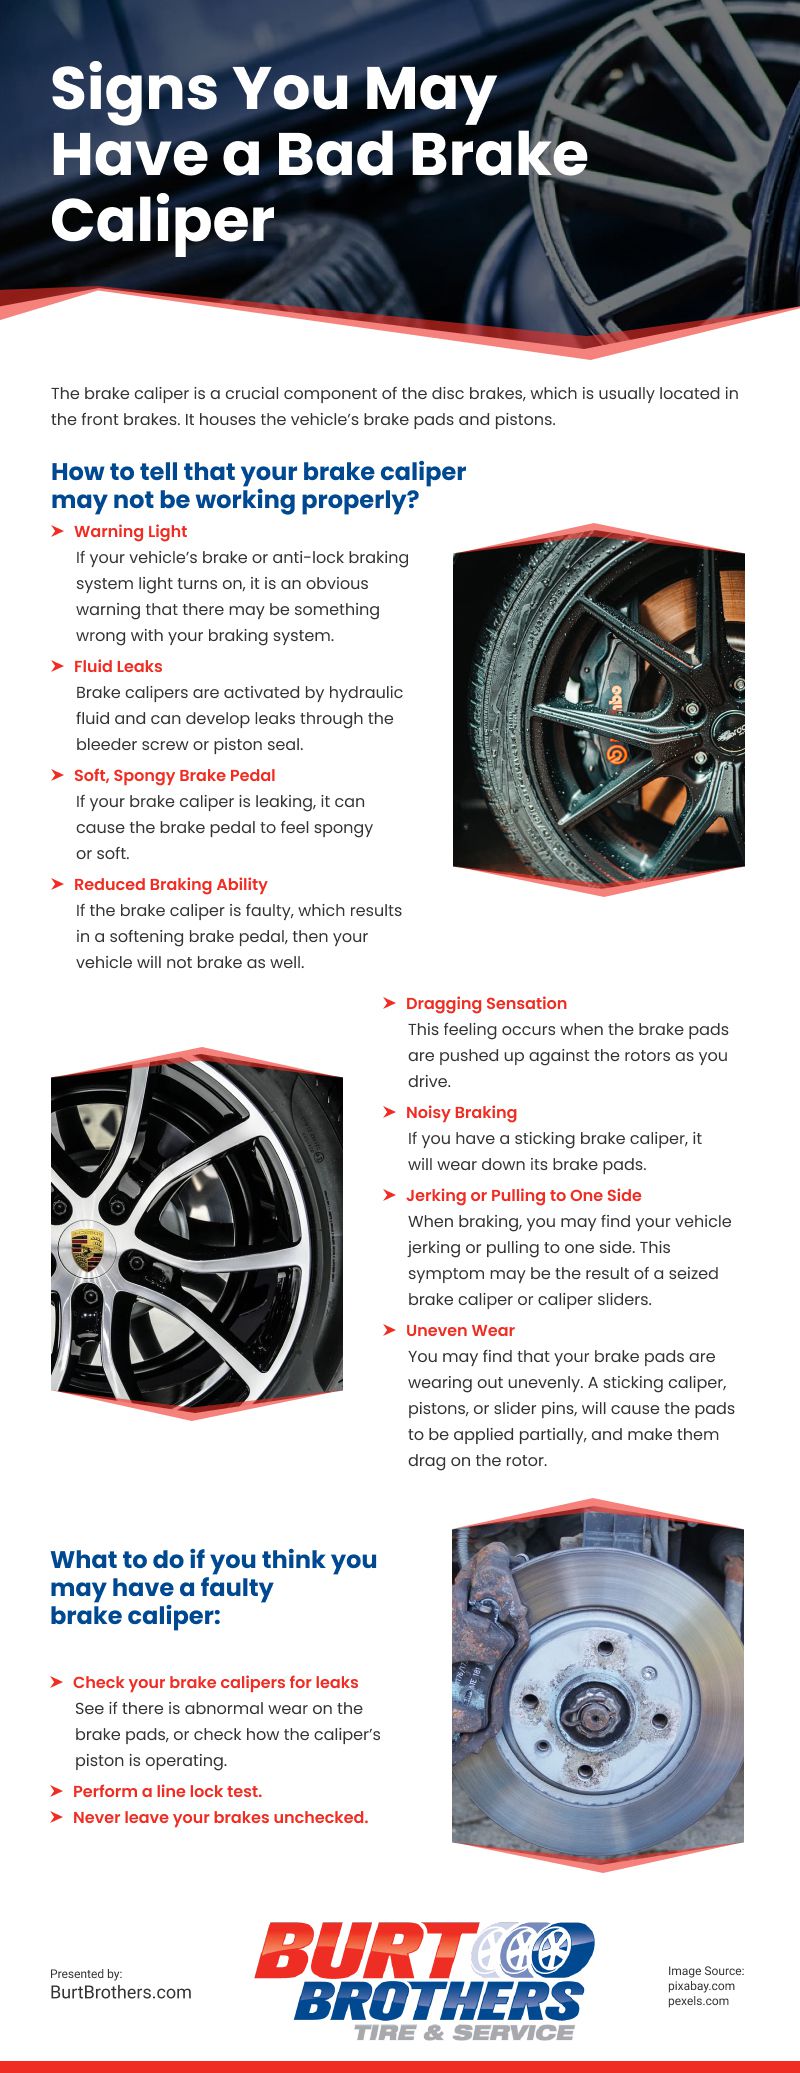 Signs You May Have a Bad Brake Caliper Infographic